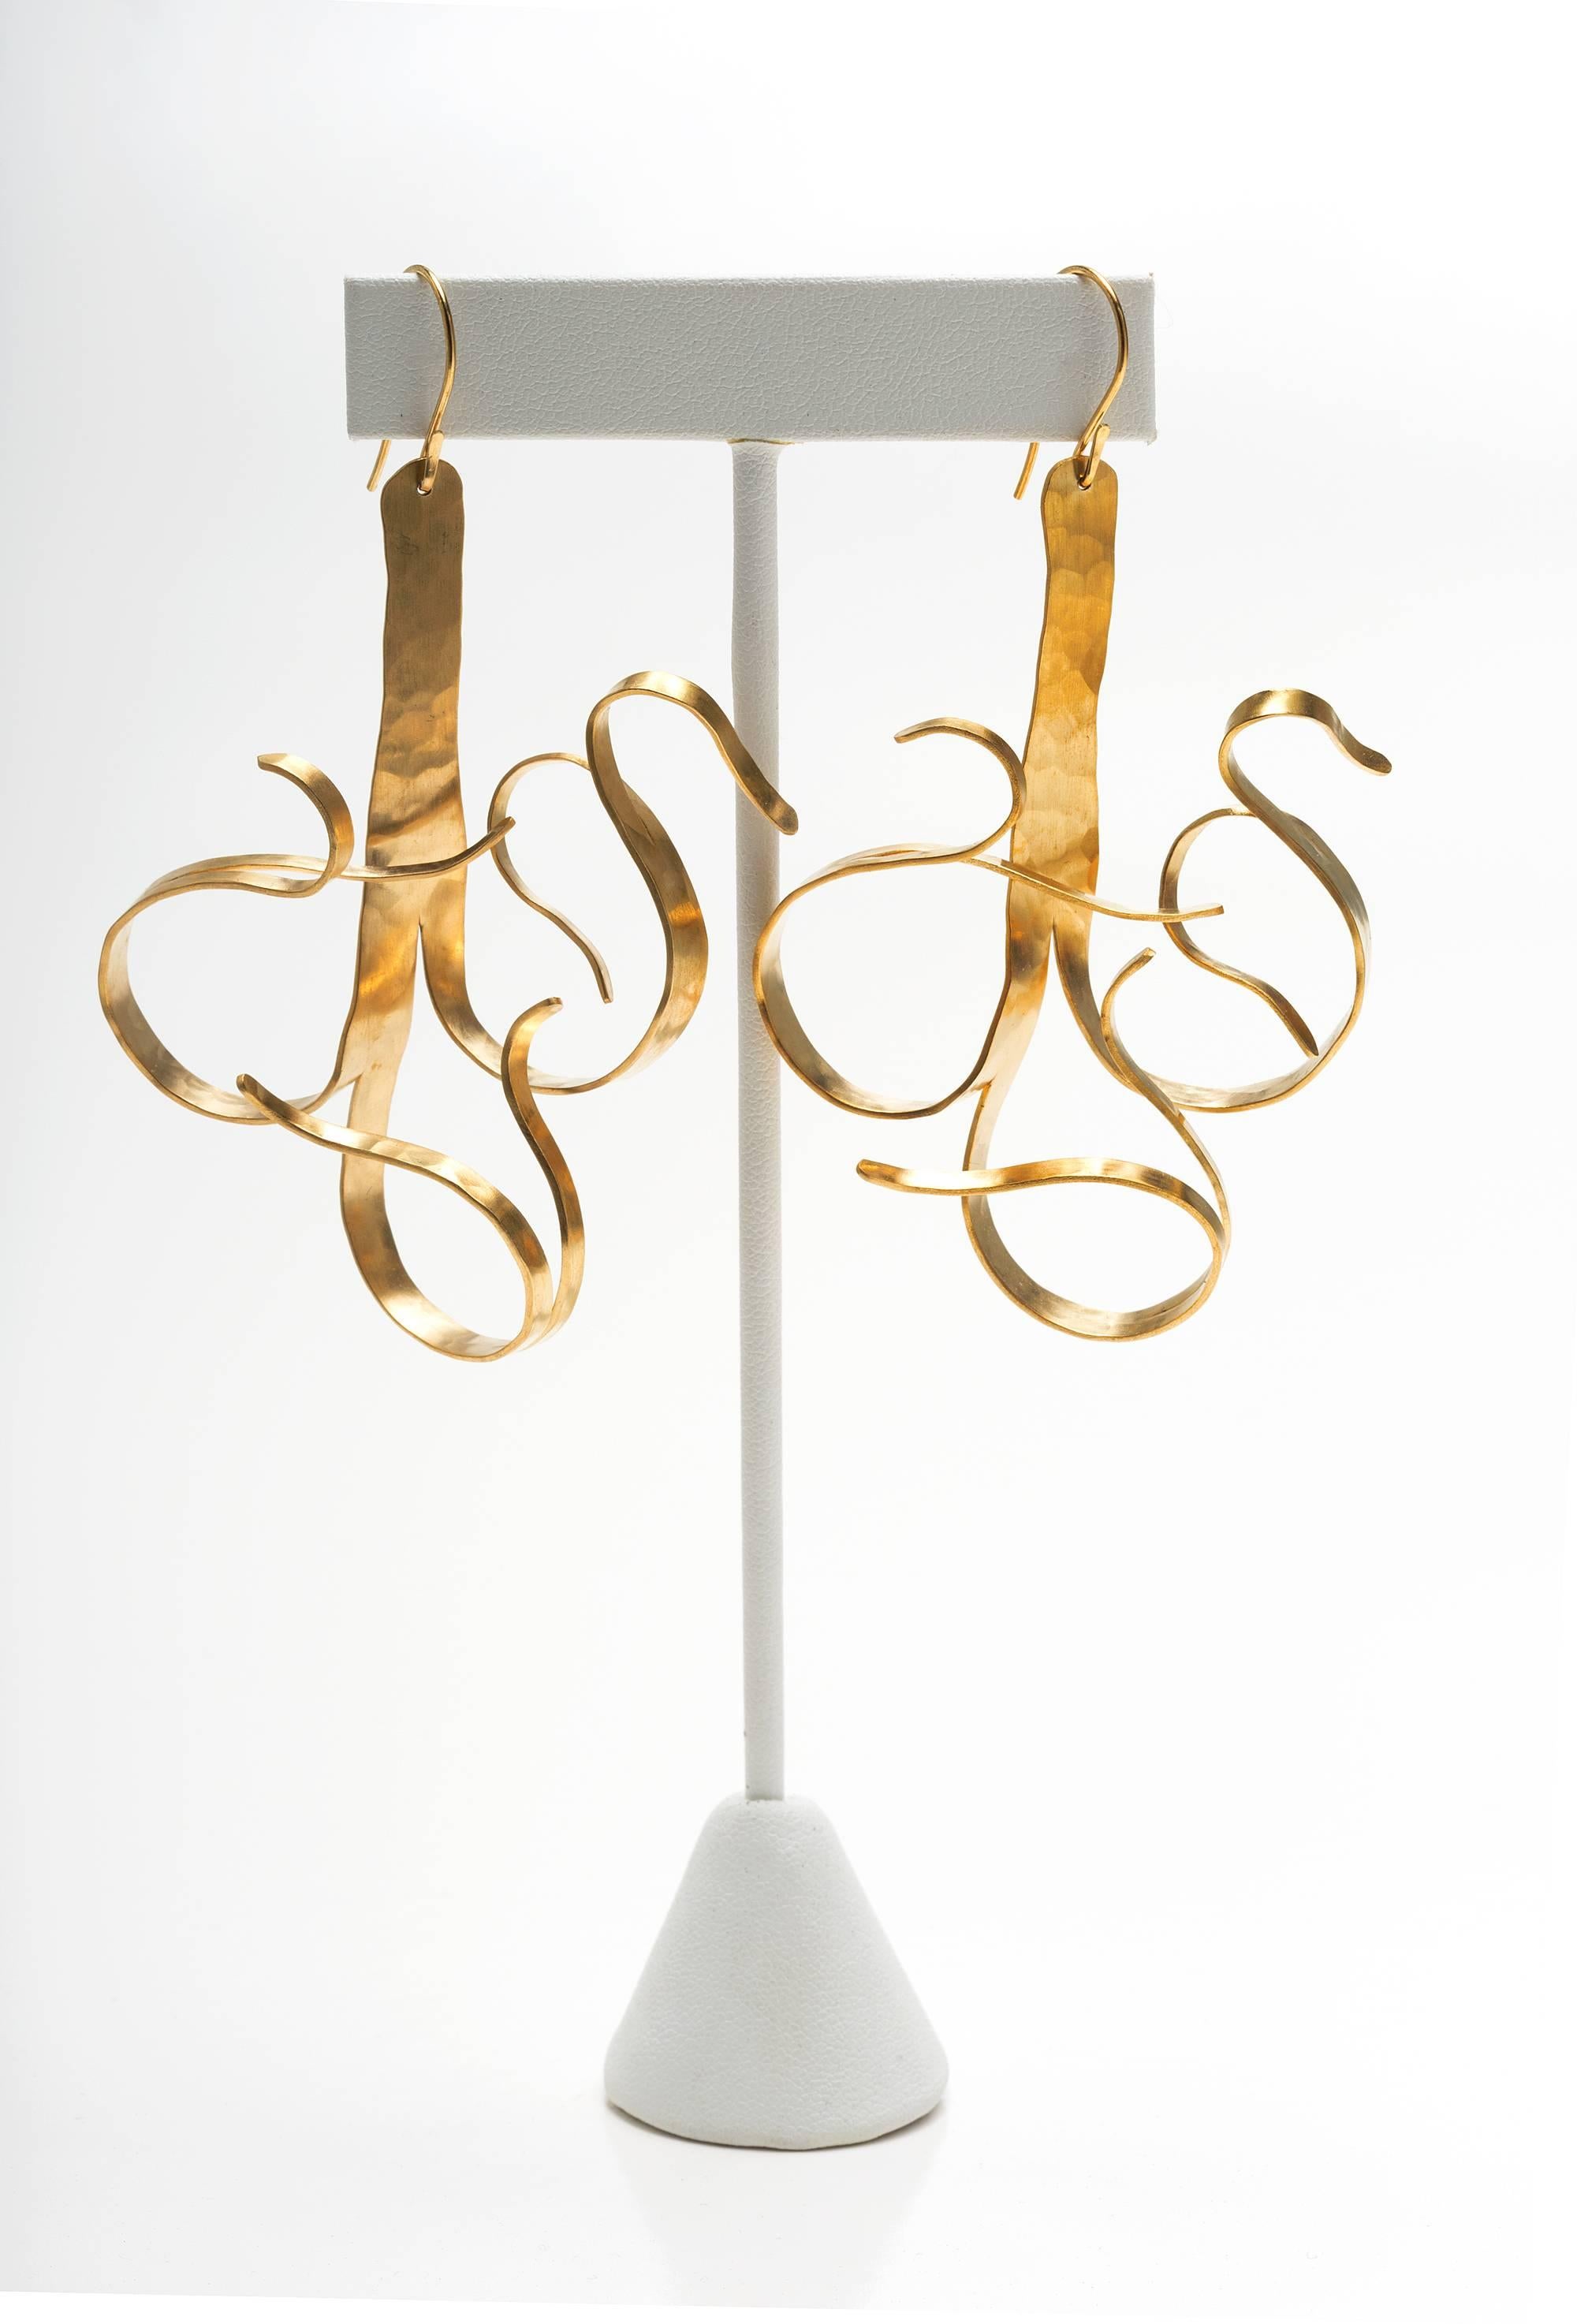 A pair of gold-plated earrings over brass by Jacques Jarrige inspired by his chandelier 